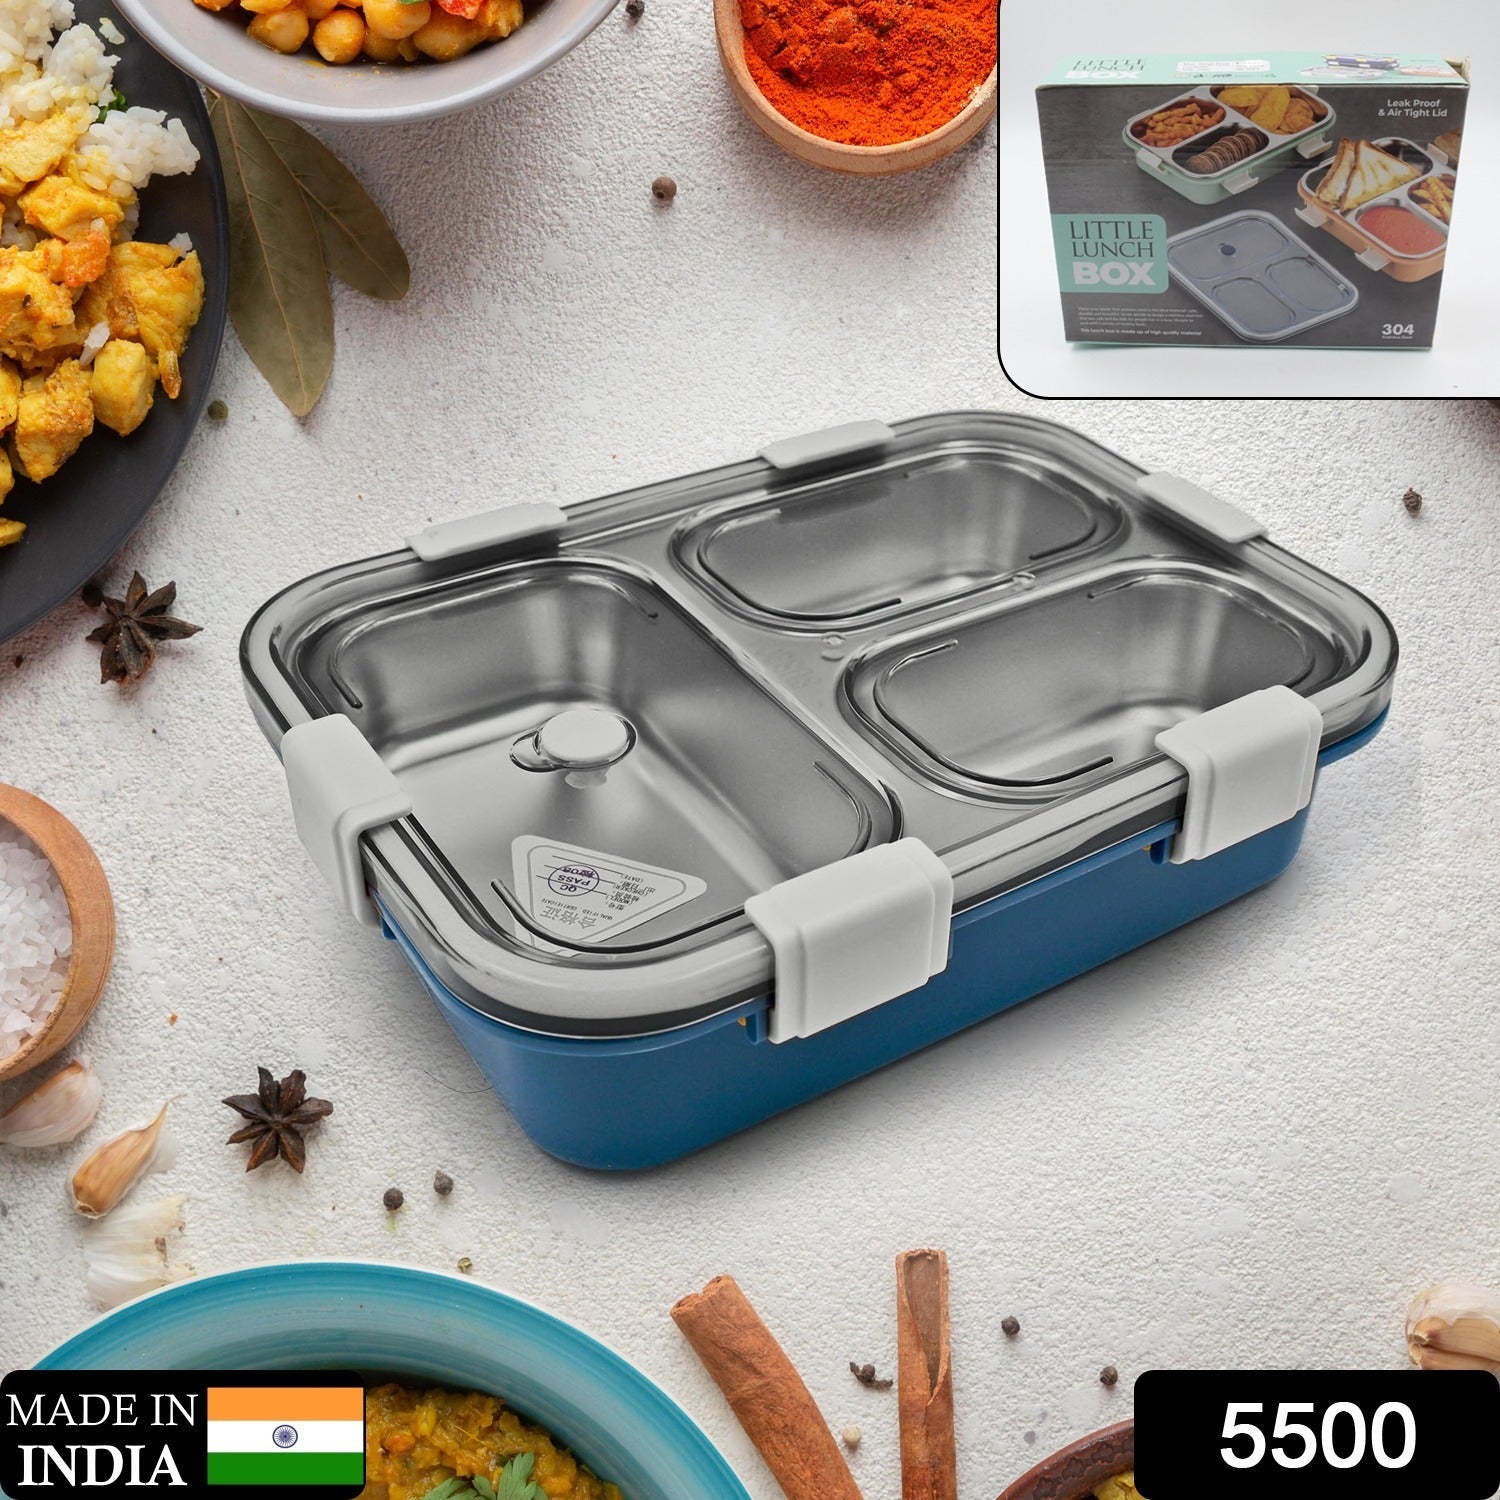 5500 3 Compartment Transparent Stainless Steel Lunch Box for Kids, Tiffin Box, Lunch Box, Lunch Box for Kids, Insulated Lunch Box, Lunch Box for Office Women and Men, Stainless Steel Tiffin Box for Boys, Girls, School Office